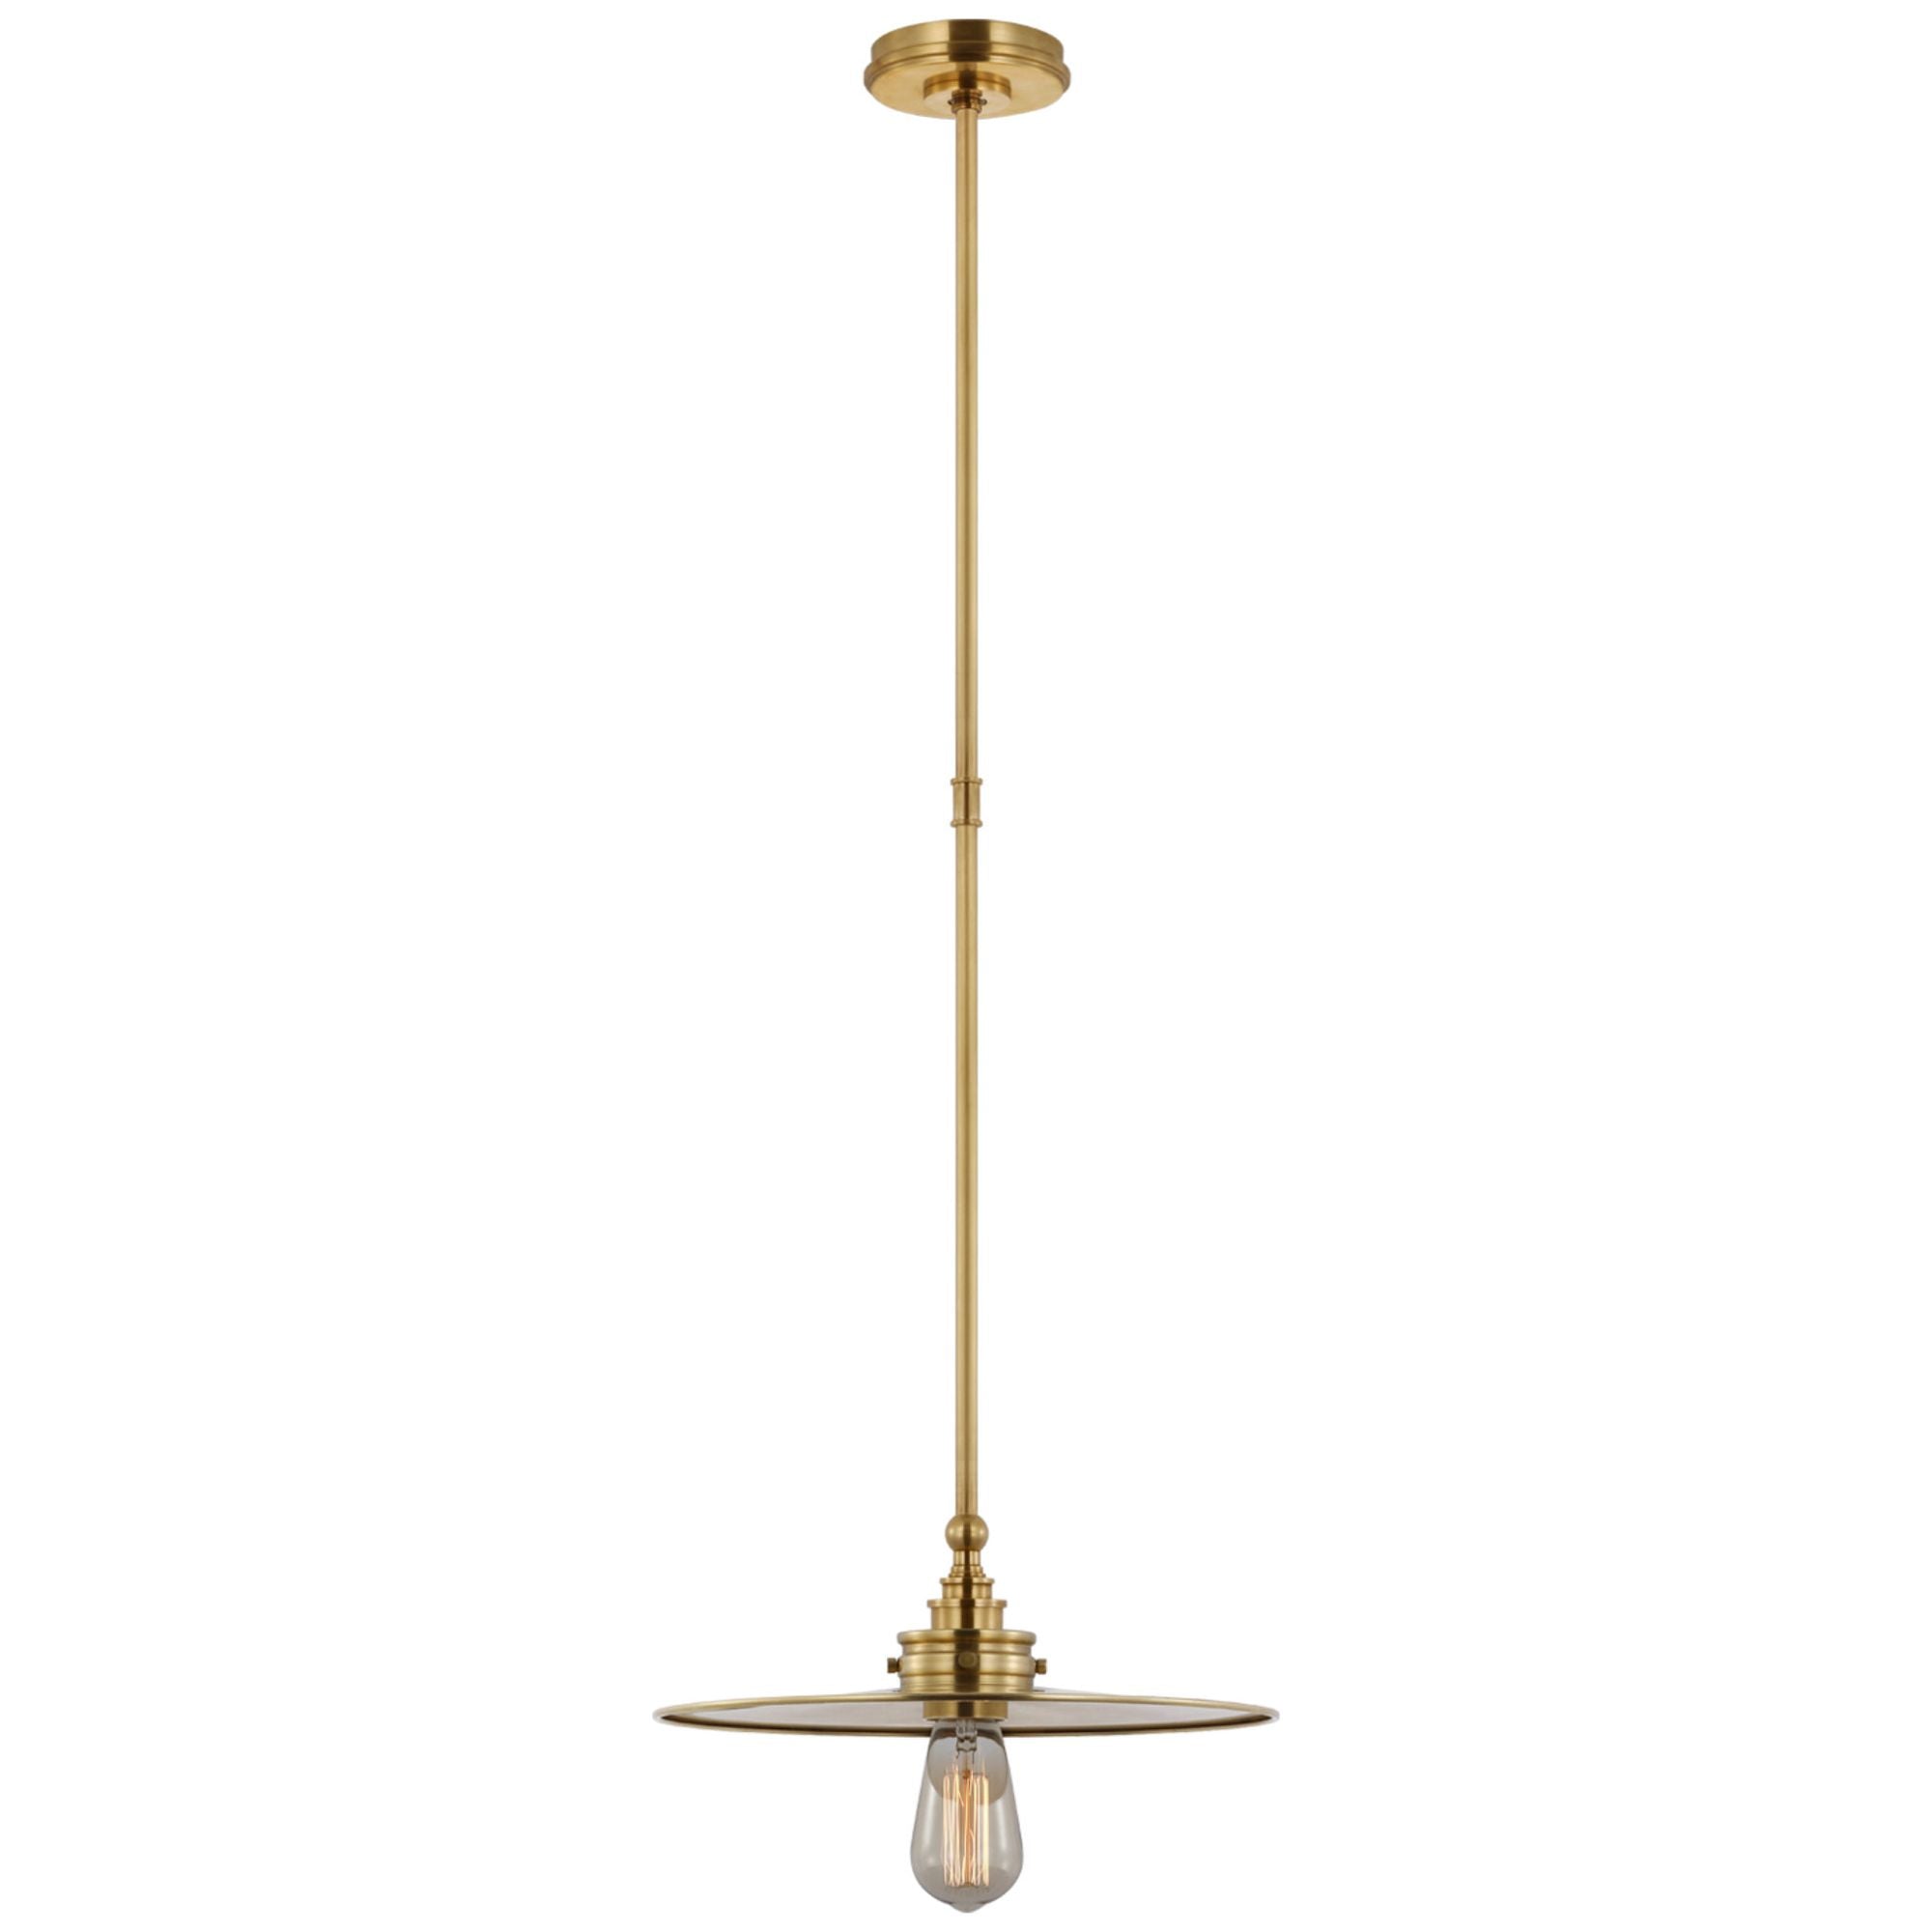 Chapman & Myers Launceton Ring Chandelier in Antique-Burnished Brass